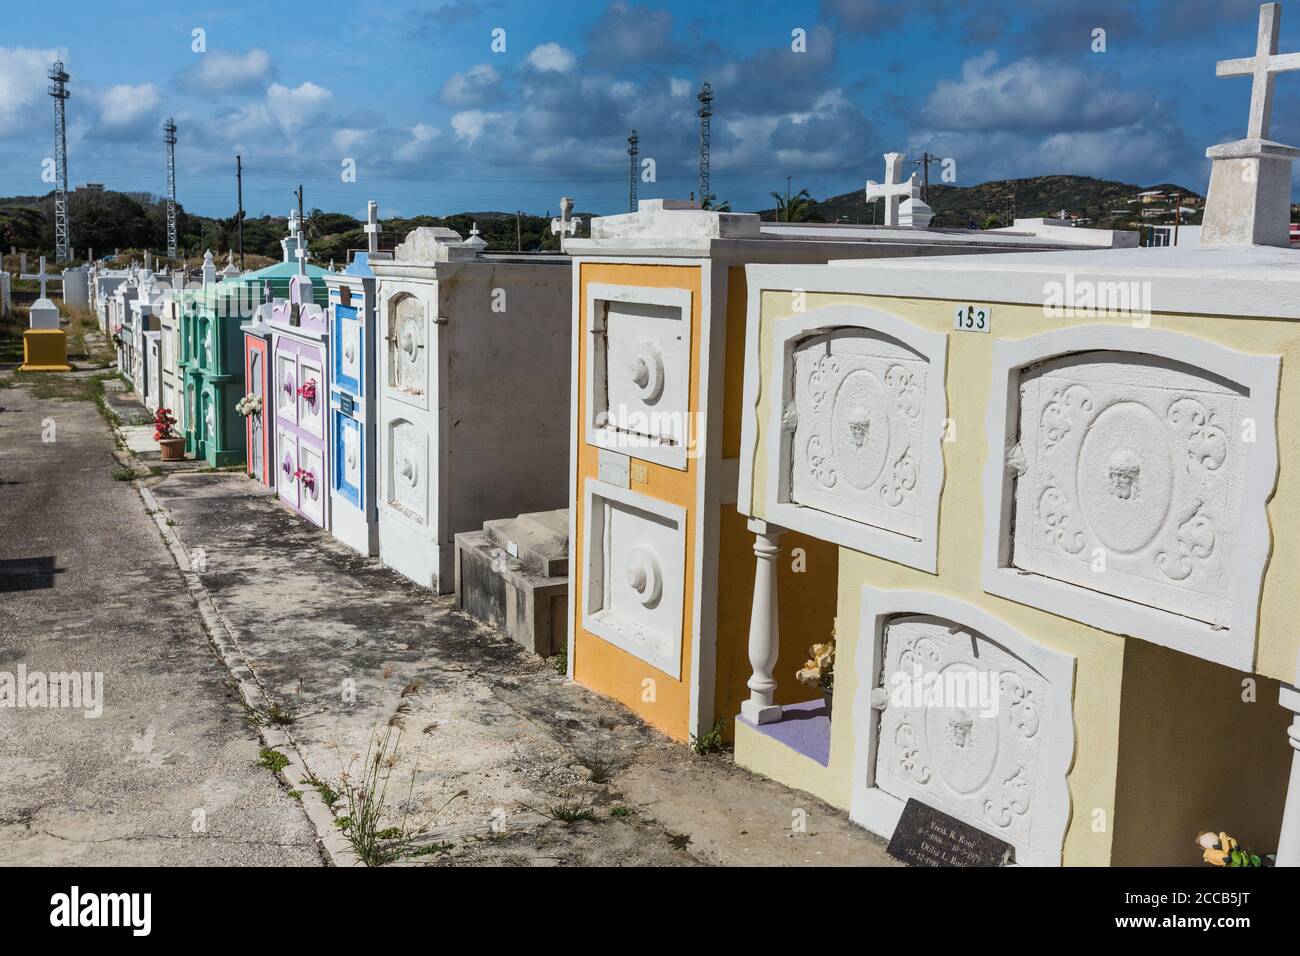 The cemetery of Saint Joseph's Catholic Church, a parish church in the town of Barber on the Caribbean island of Curacao in the Netherlands Antilles. Stock Photo